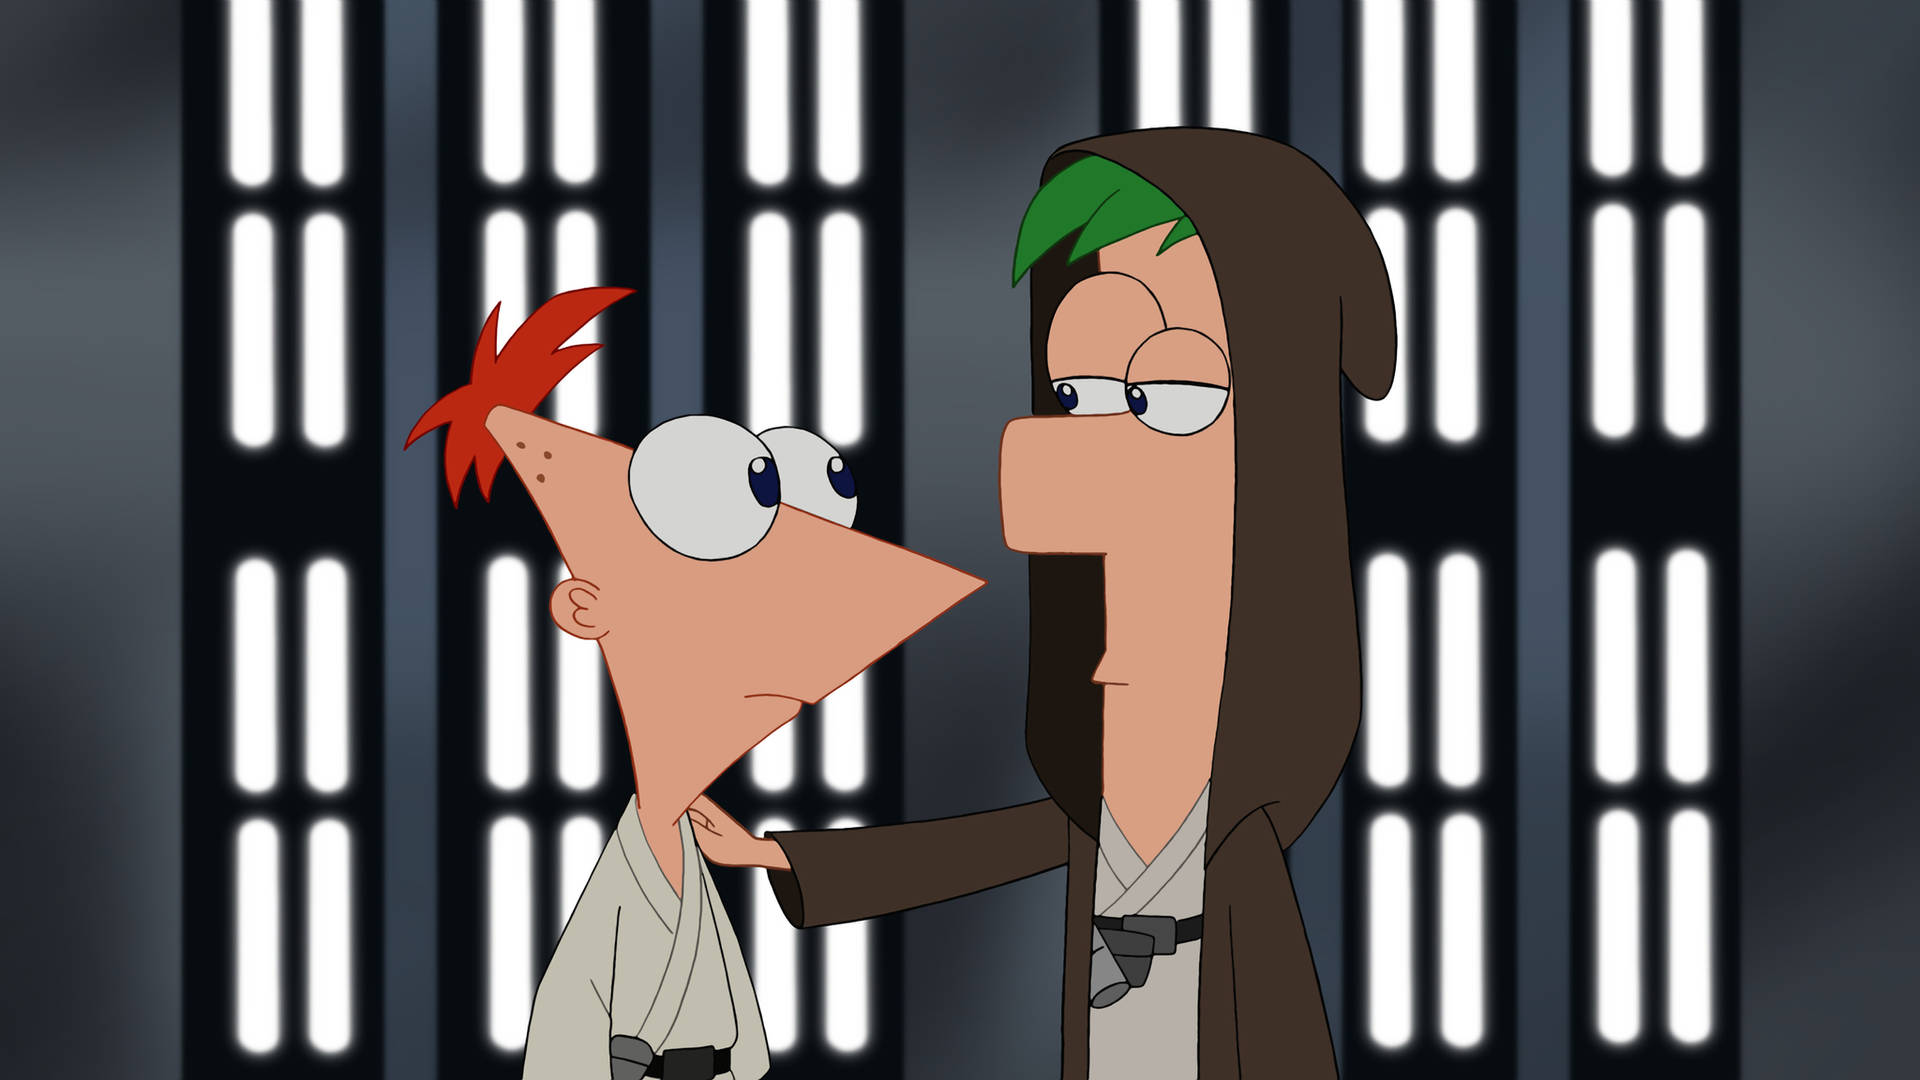 Phineas And Ferb Star Wars Crossover Wallpaper